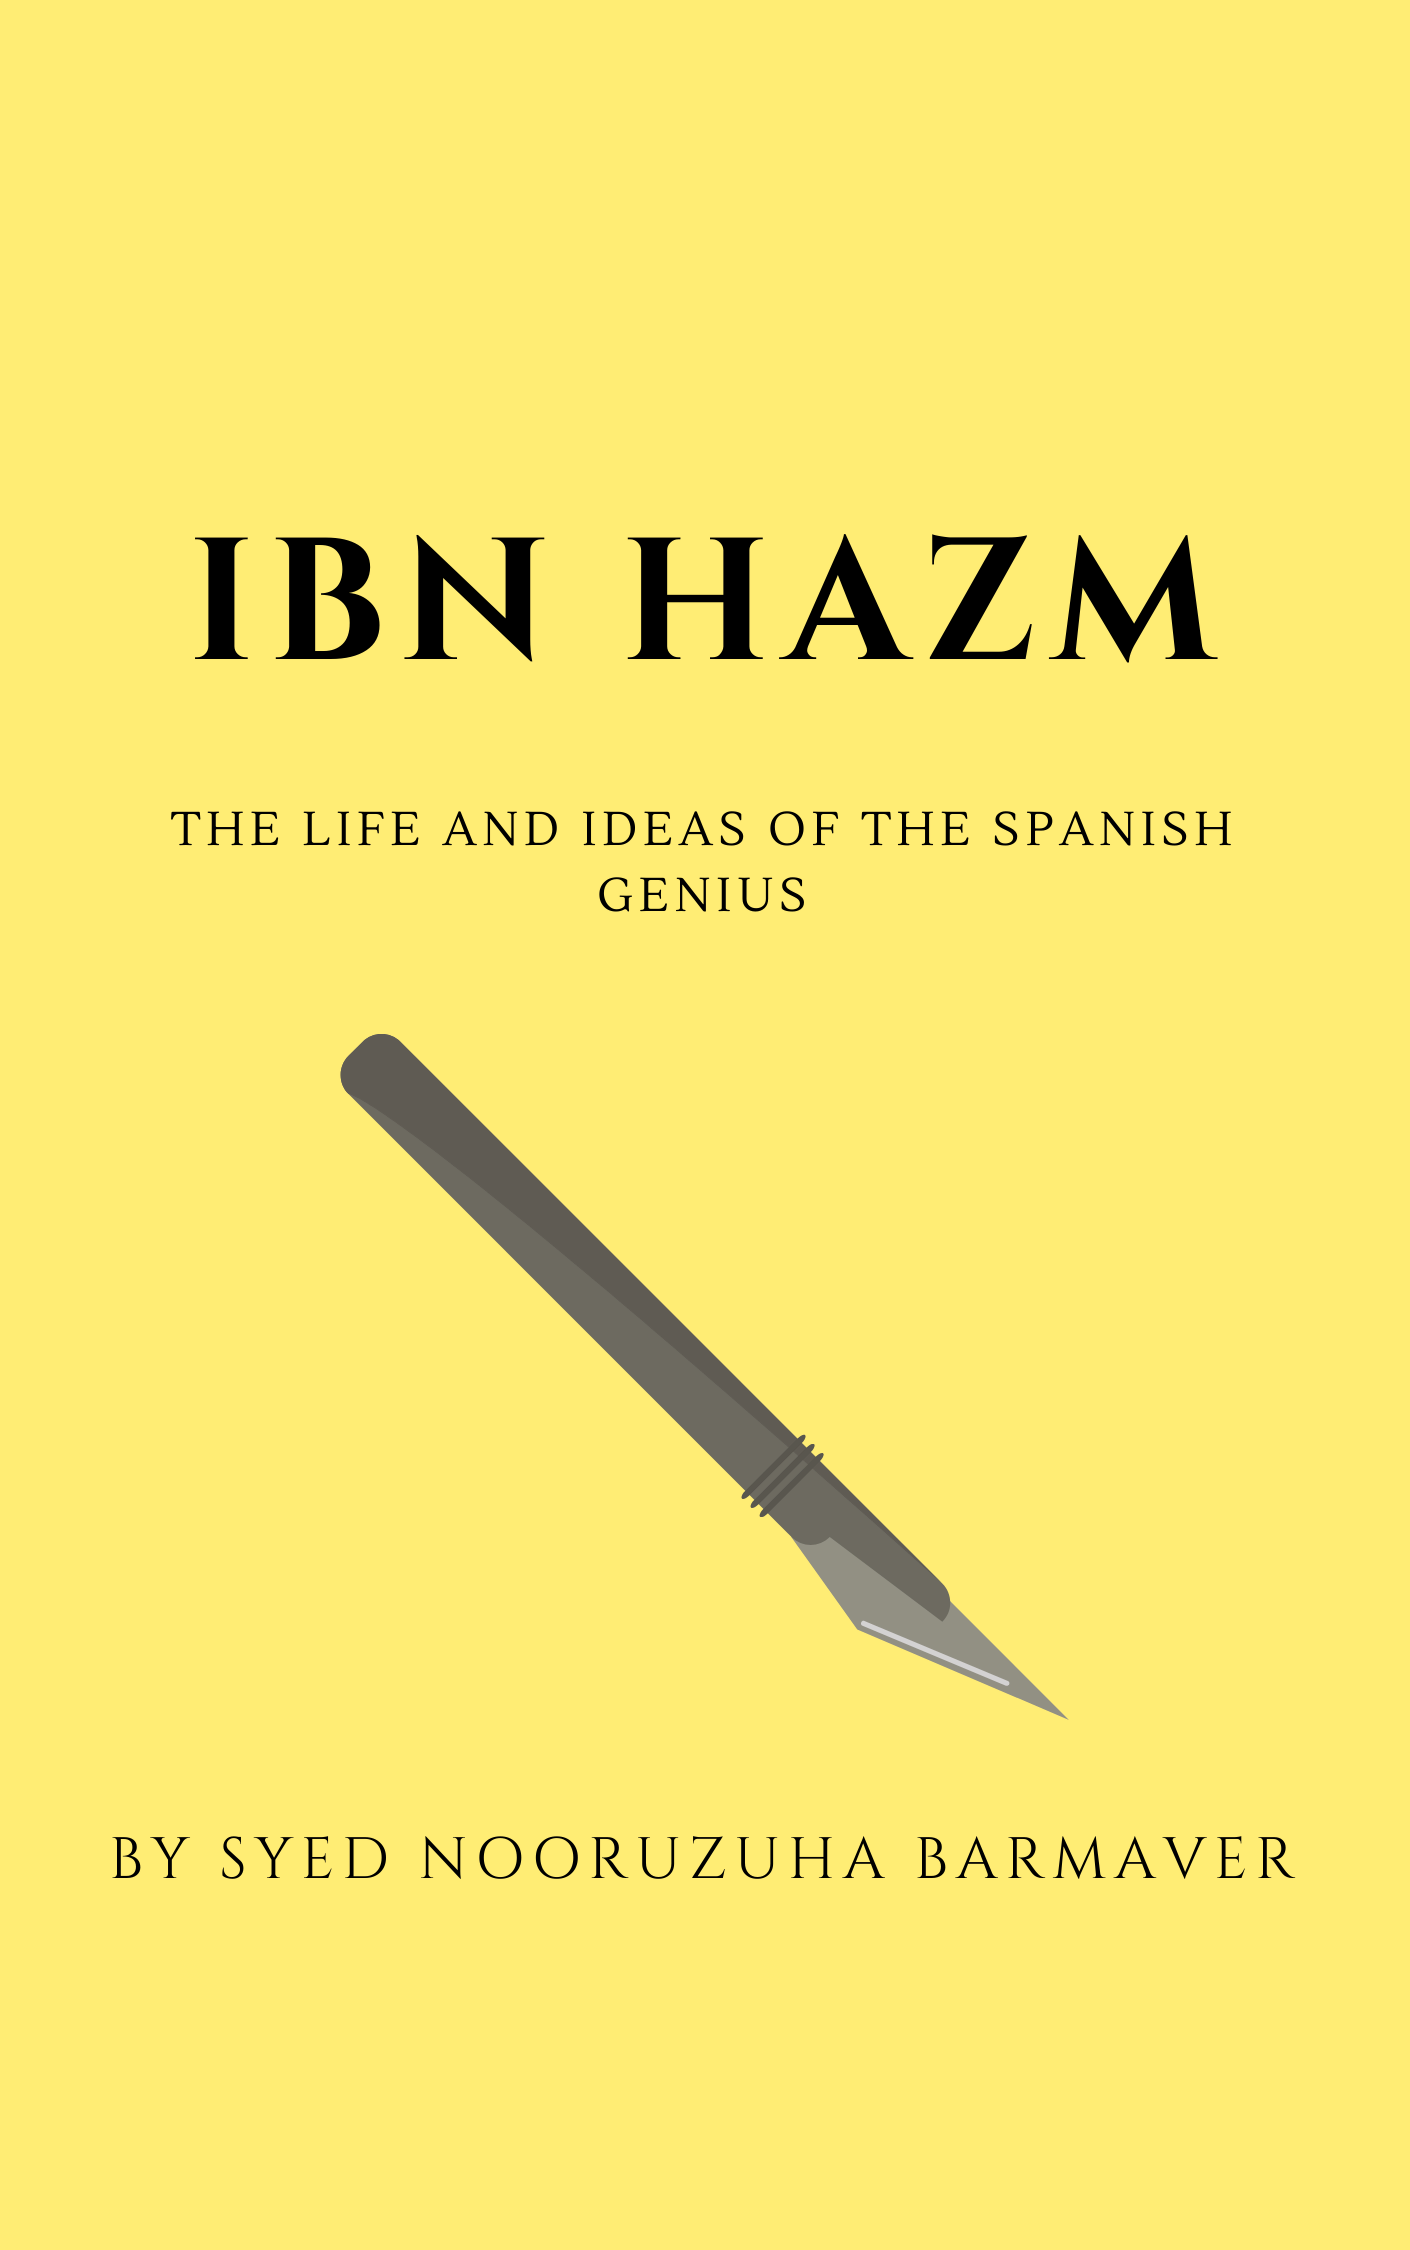 📕Our First Book Published: Ibn Hazm, The Life And Ideas Of A Spanish Genius By Syed Nooruzuha Barmaver